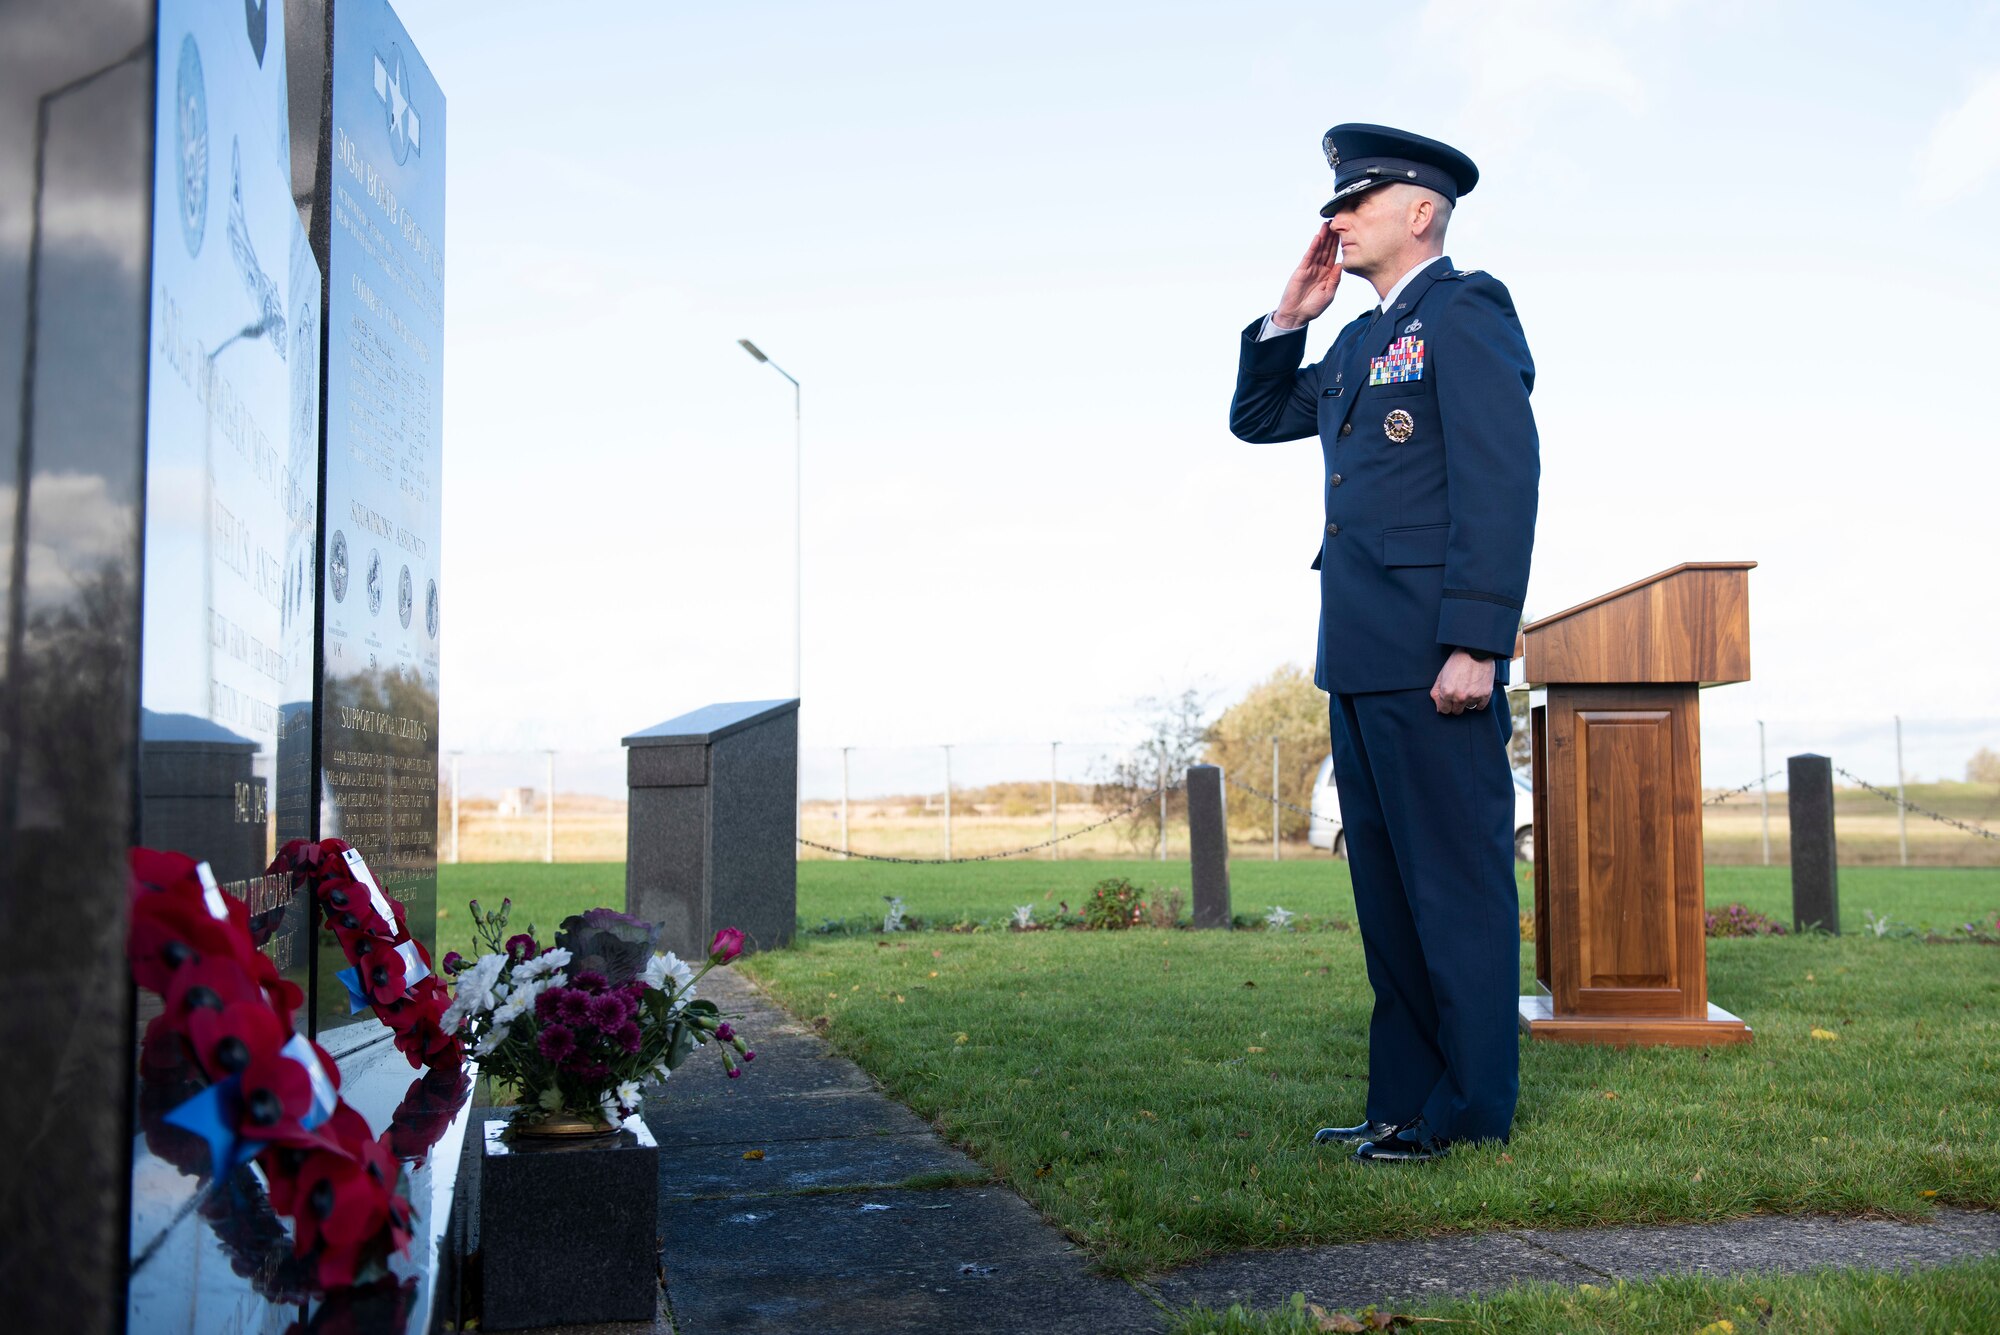 U.S. Air Force Col. Richard Martin, 423rd Air Base Group commander, salutes during a Remembrance Sunday ceremony near the 303rd Bombardment Group memorial monument at RAF Molesworth, England, Nov. 3, 2020. Remembrance Sunday is commemorated the second Sunday every November to honor the service and sacrifice of Armed Forces, British and Commonwealth veterans, as well as the Allies that fought alongside them in the two World Wars and later conflicts. (U.S. Air Force photo by Senior Airman Jennifer Zima)